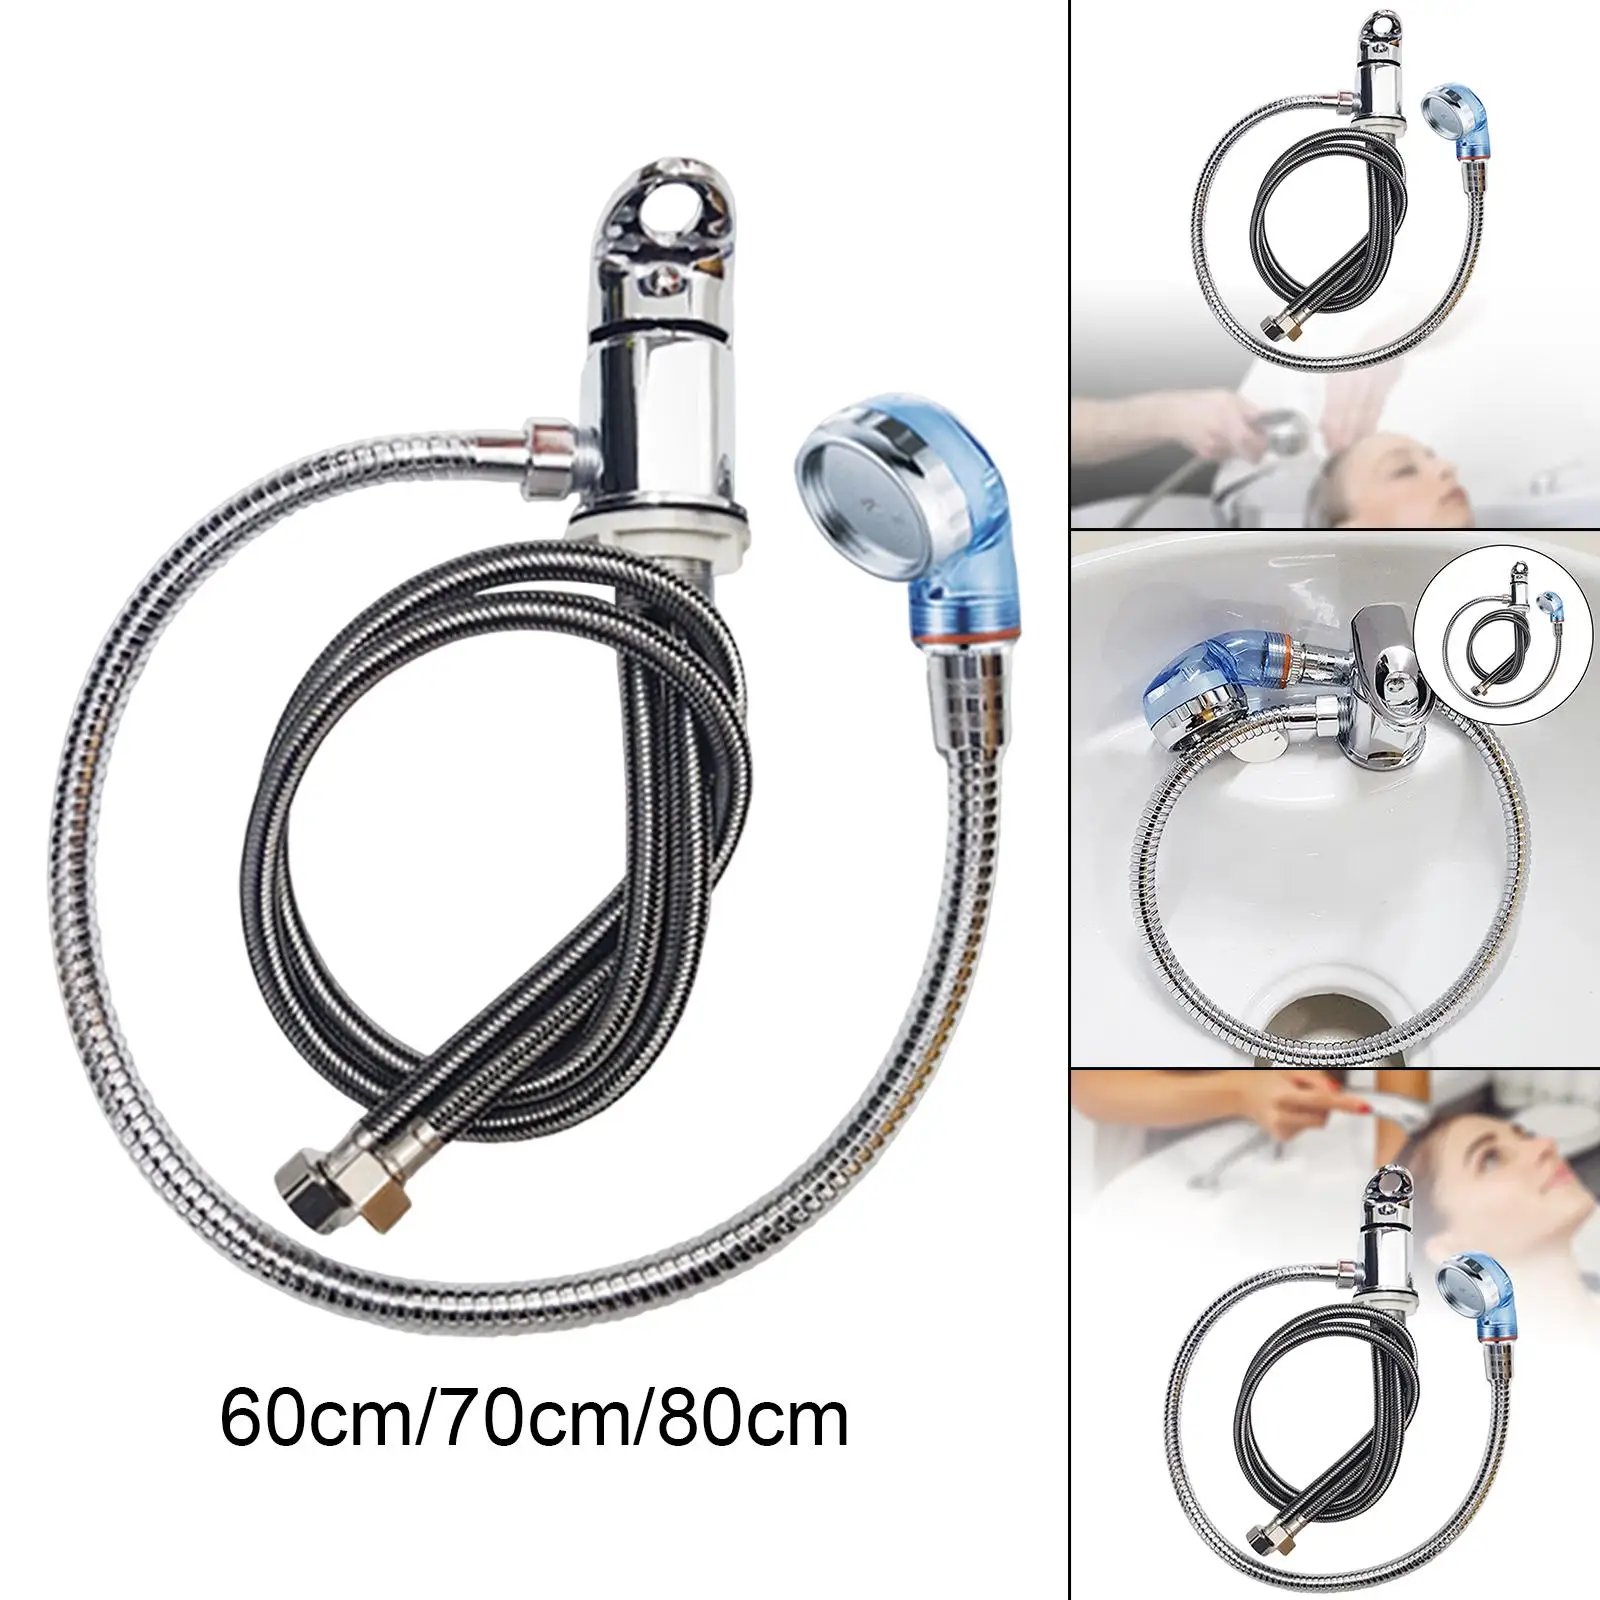 MagiDeal Salon Shampoo Unit Bowl Sink Faucet Spray Hose Set Hot and Cold Water Supply Kit 80cm 